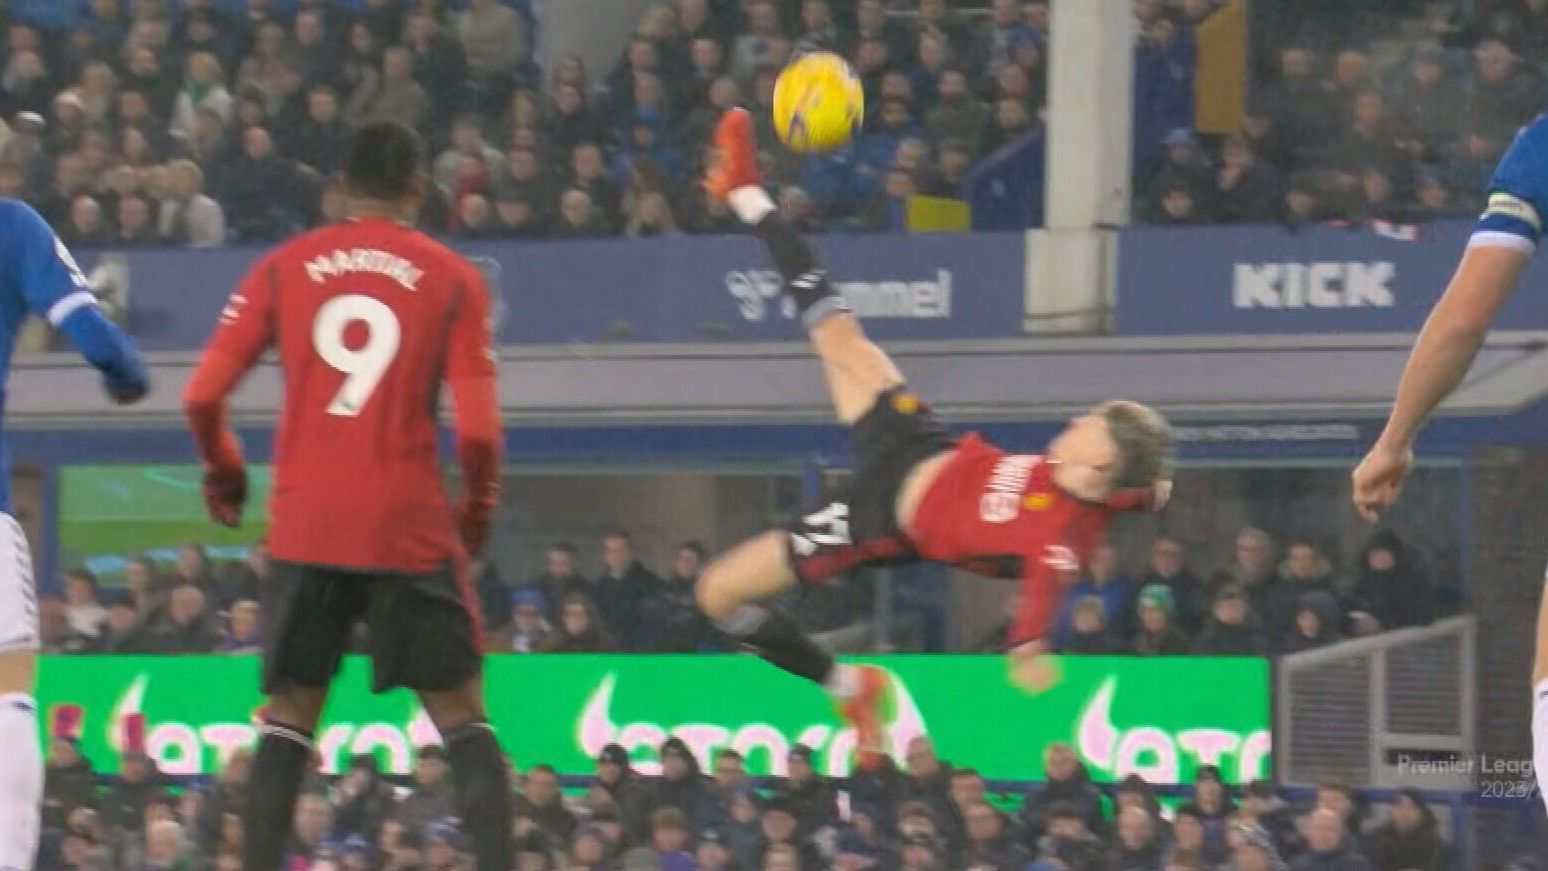 'Oh my god': Teen's 'out of this world' wonder goal stuns Premier League, silences protests